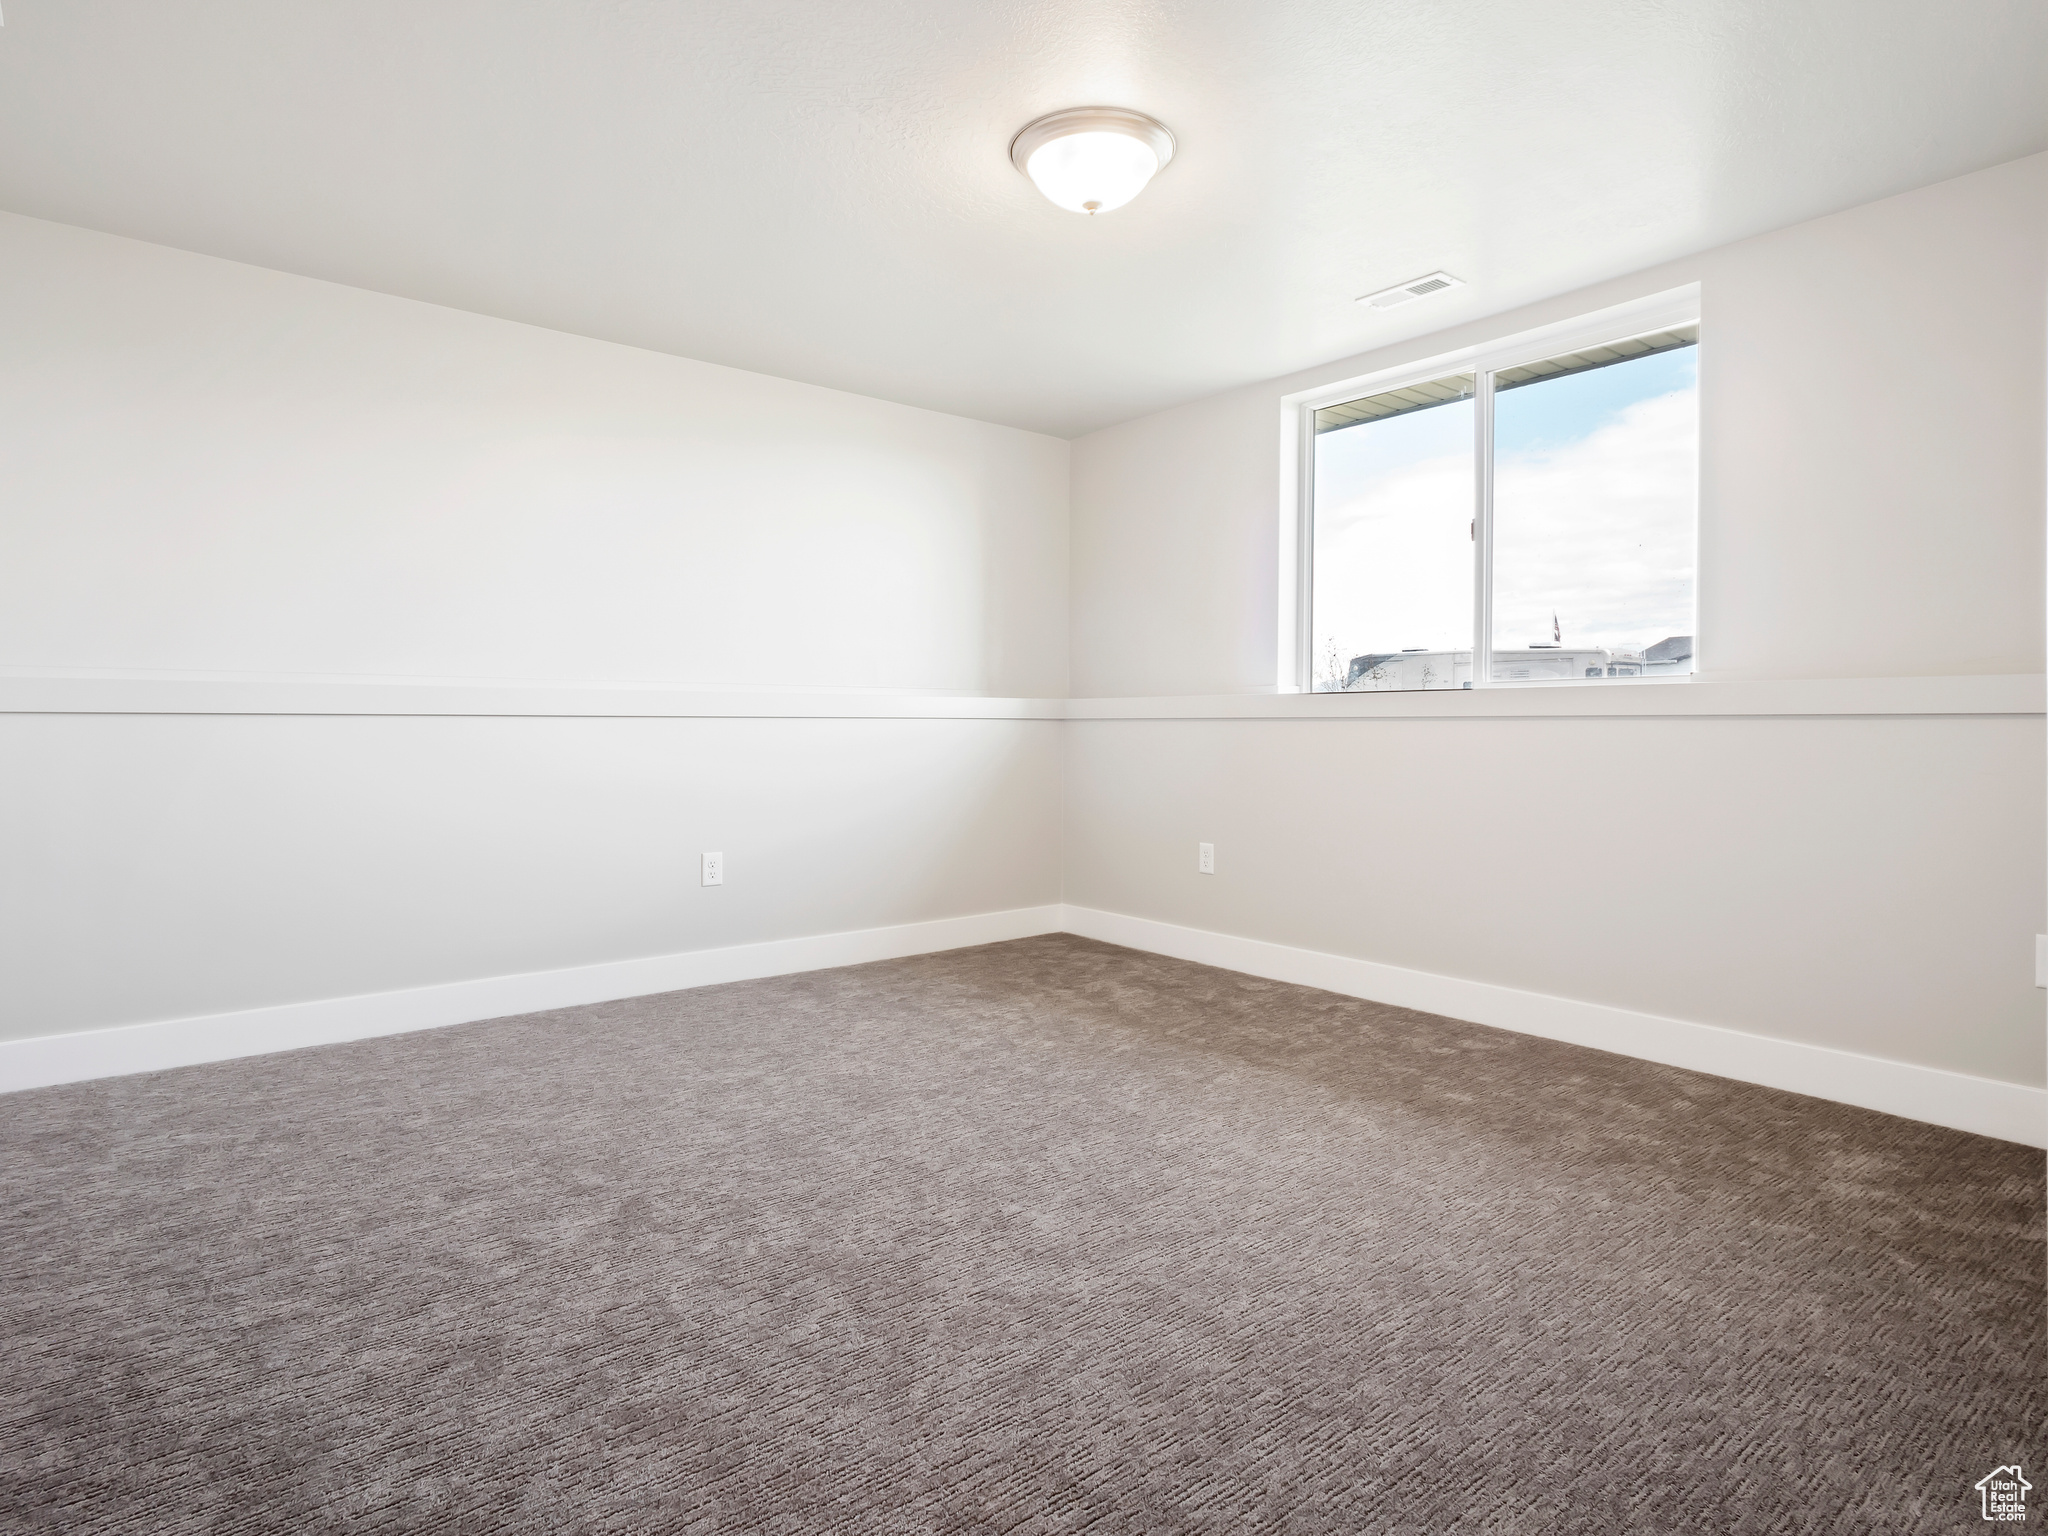 Unfurnished room with carpet flooring